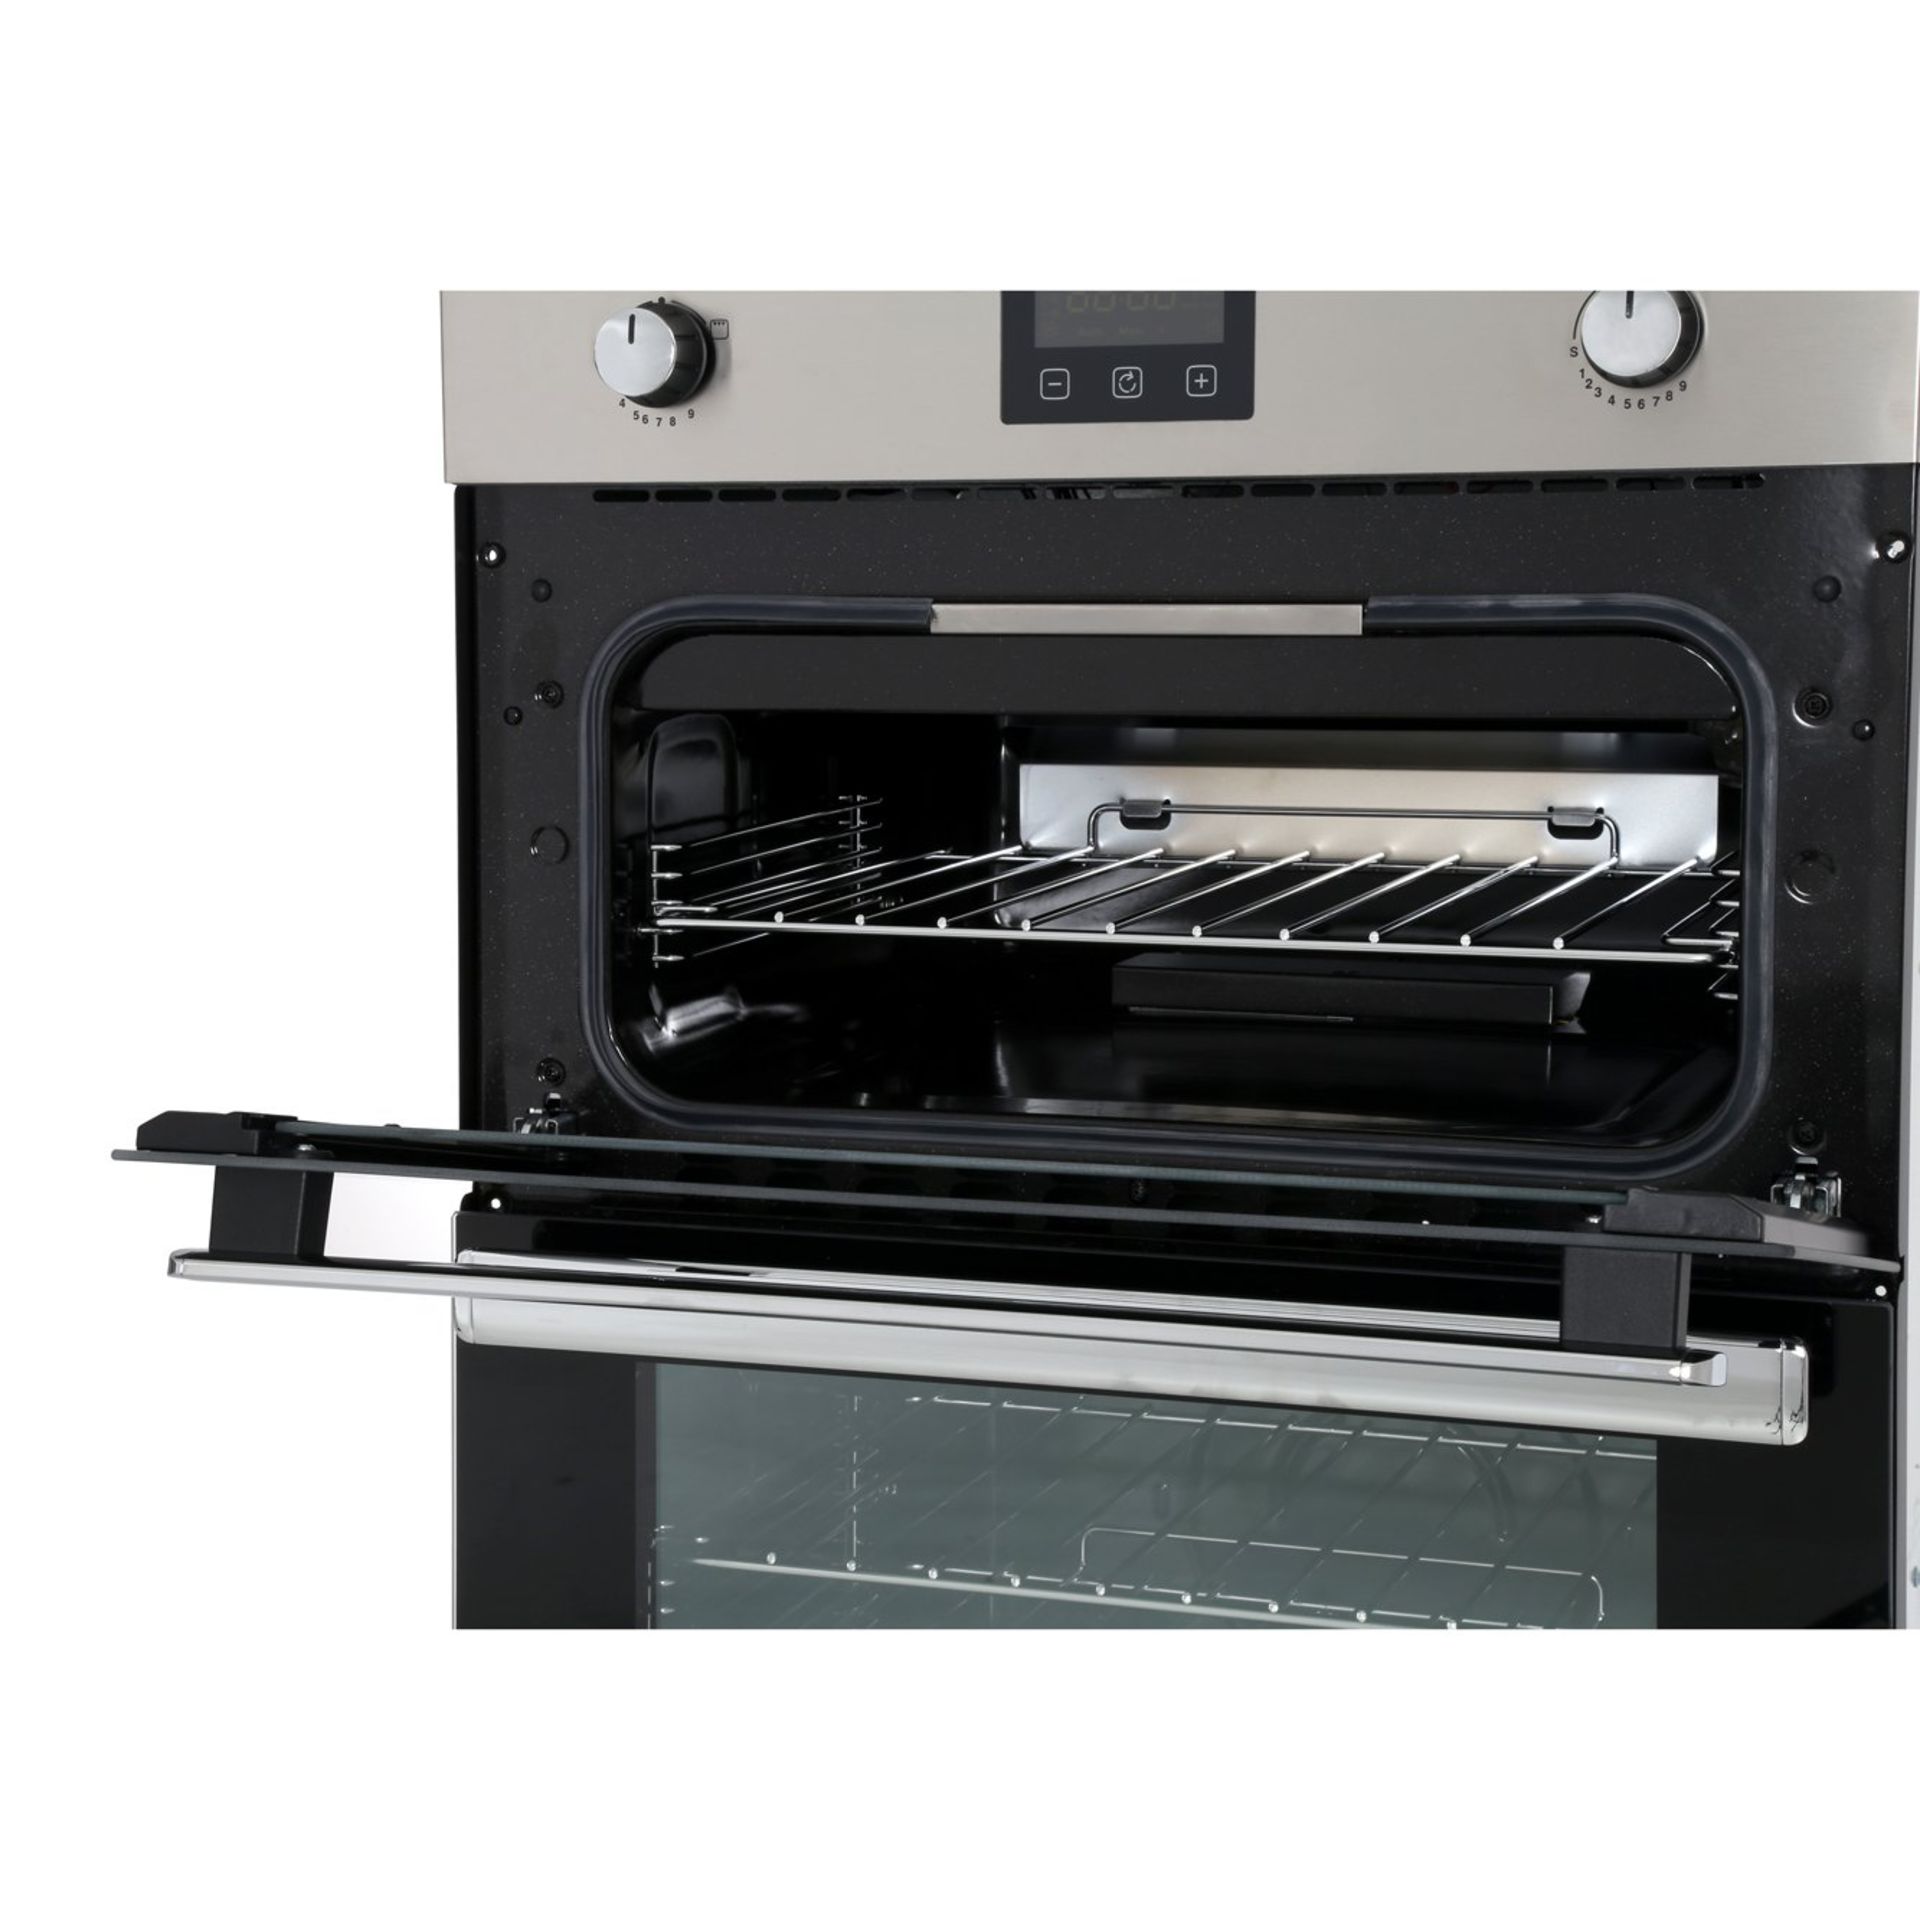 Grade B Belling BI902G Built-In Gas Oven, A/A Energy Rating, Stainless Steel in Black - Image 6 of 6